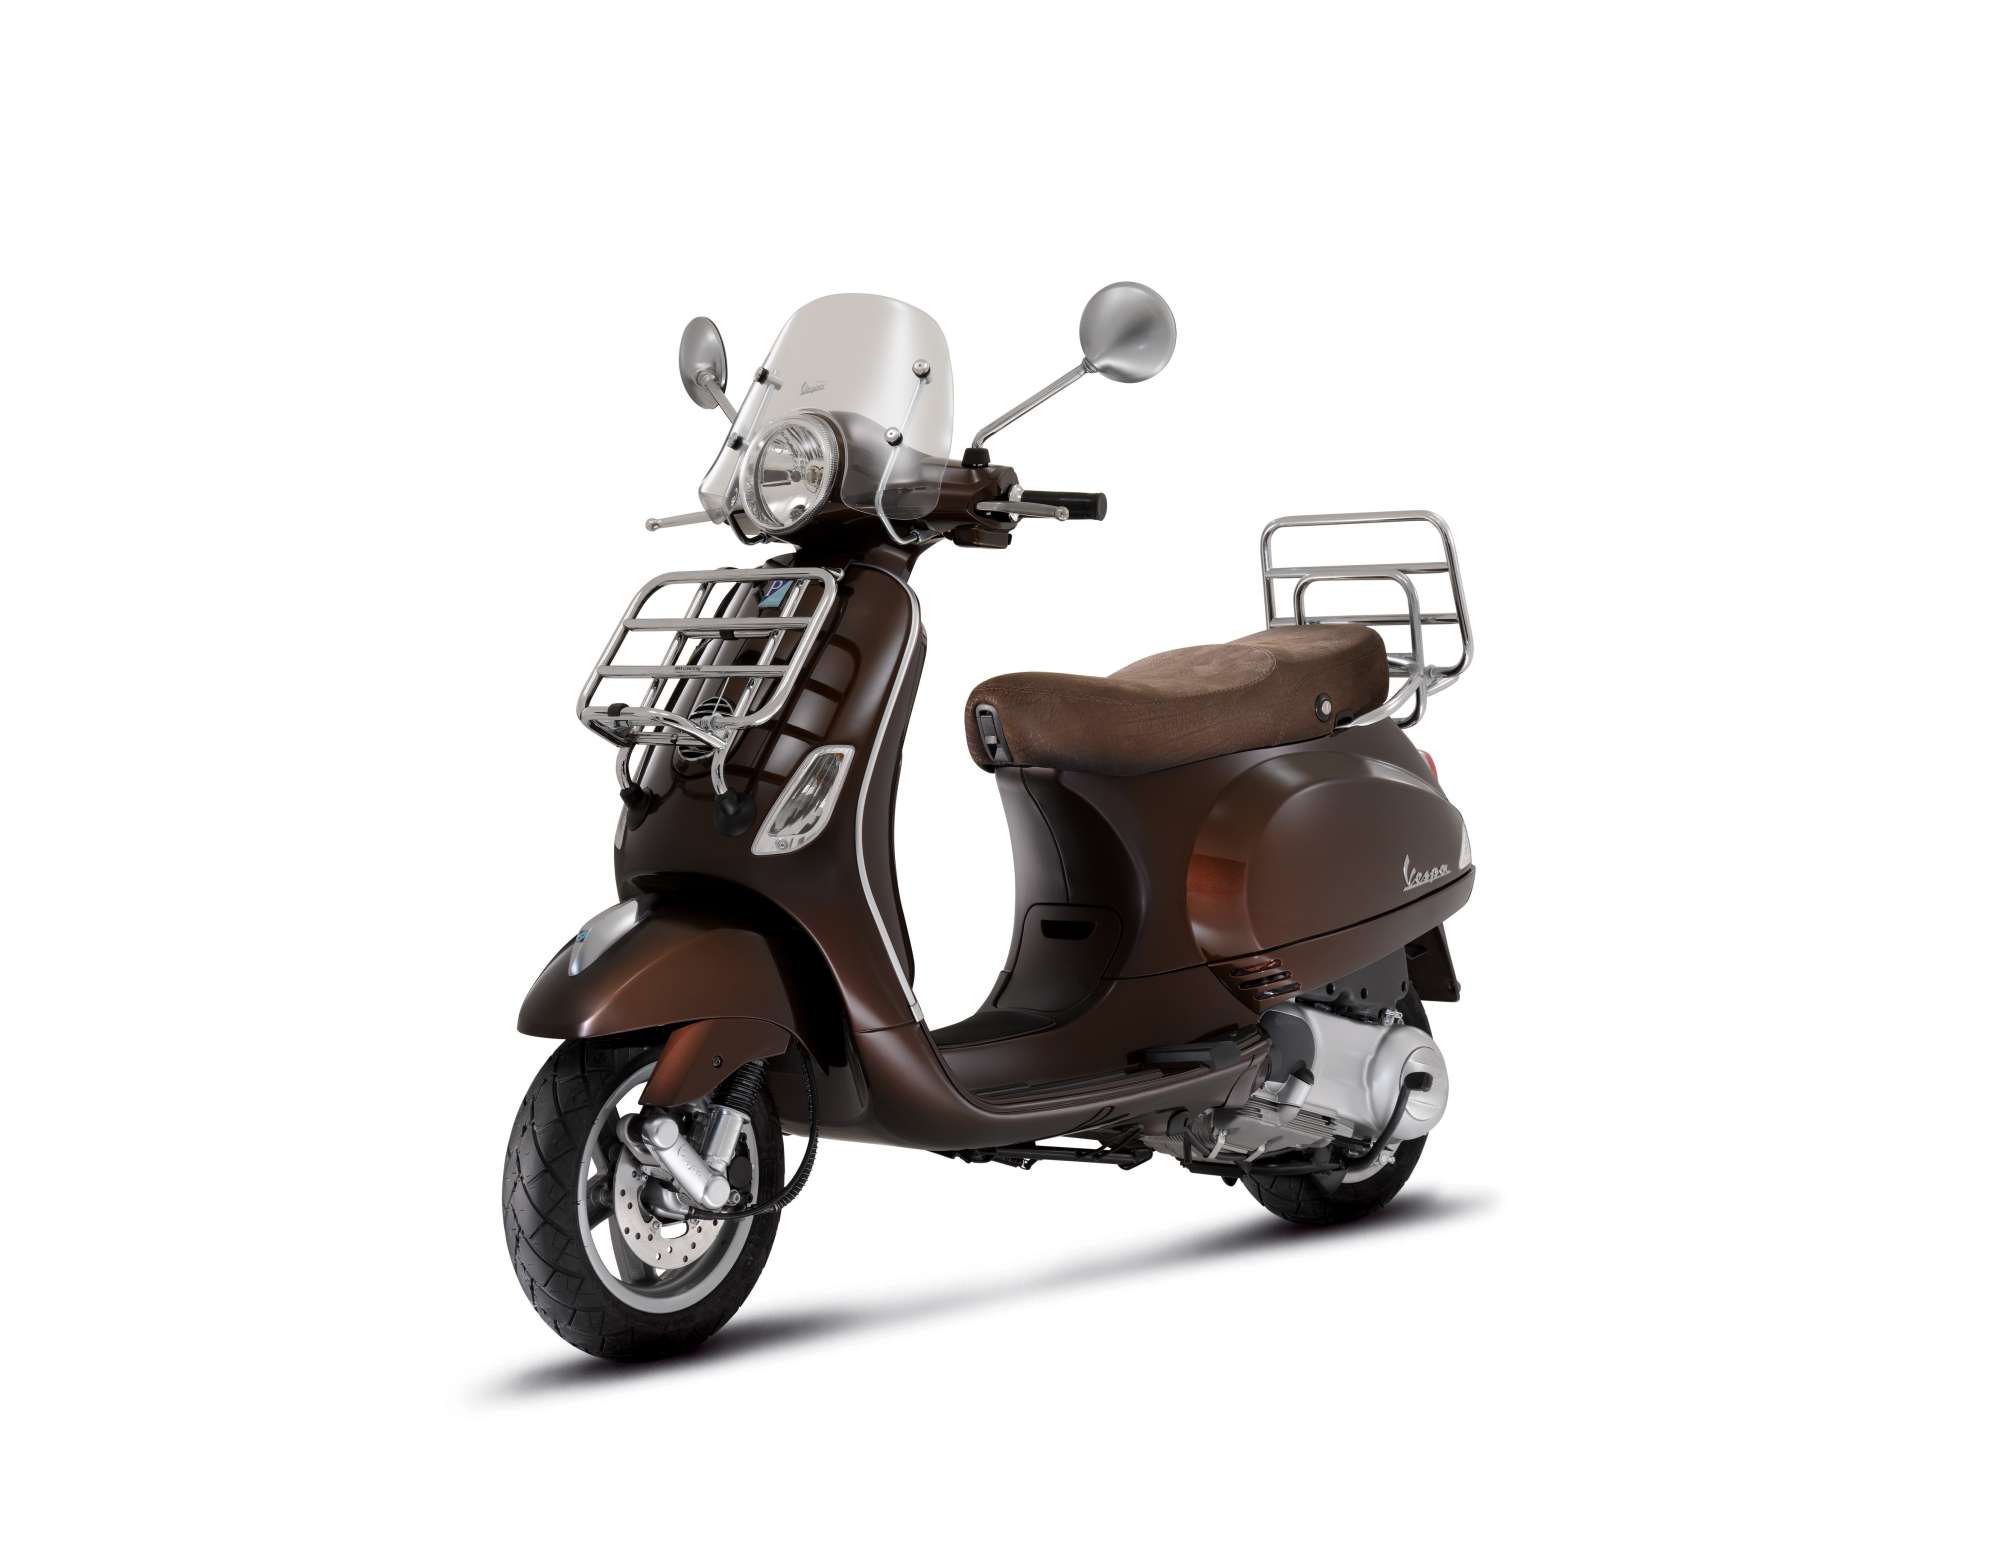 Vespa LX 50 2T Touring - technical data, prices, reviews